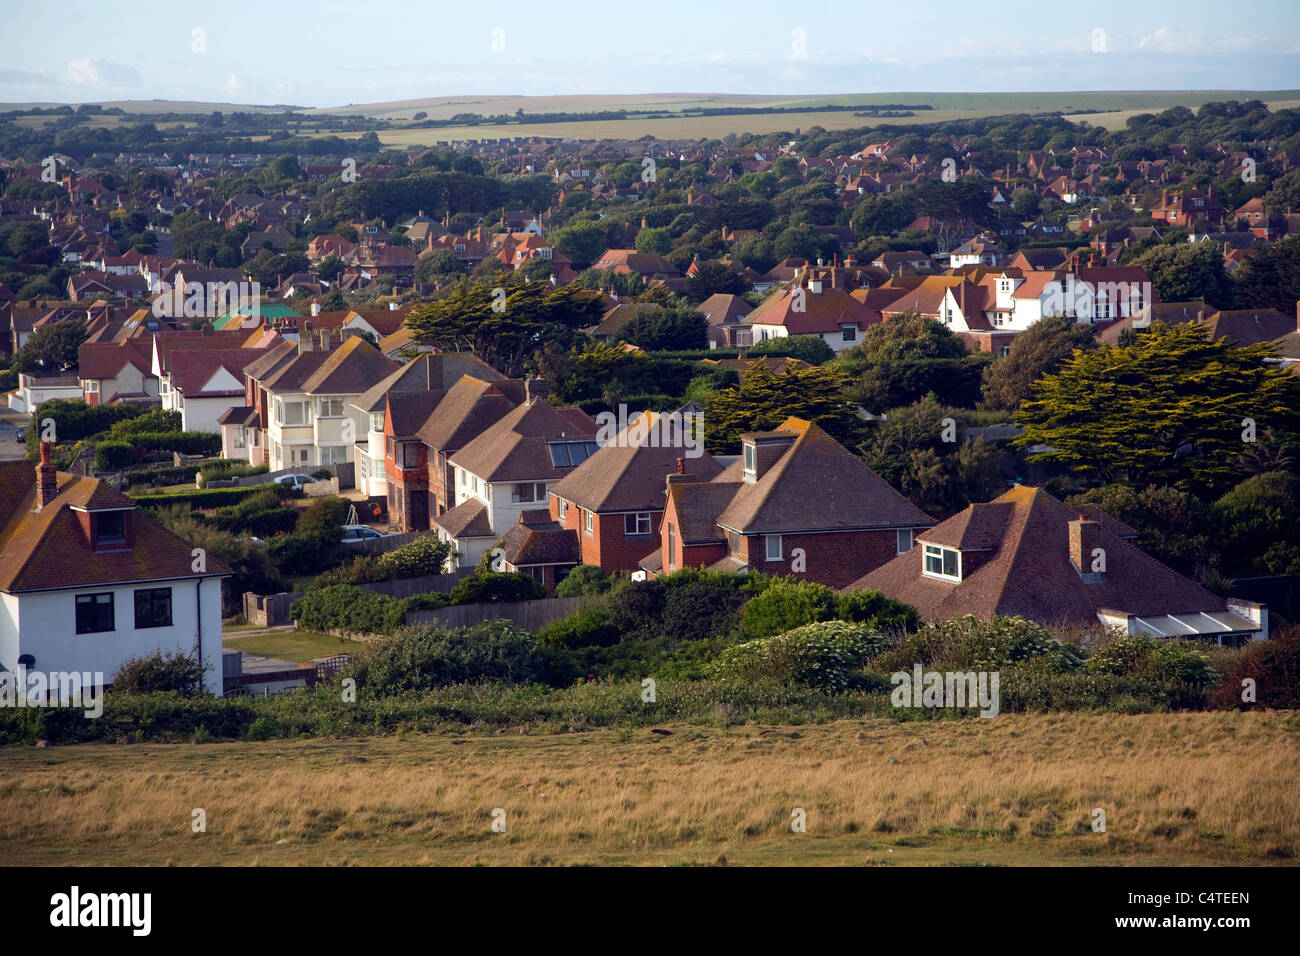 Detached private housing Seaford, East Sussex, England uk Stock Photo